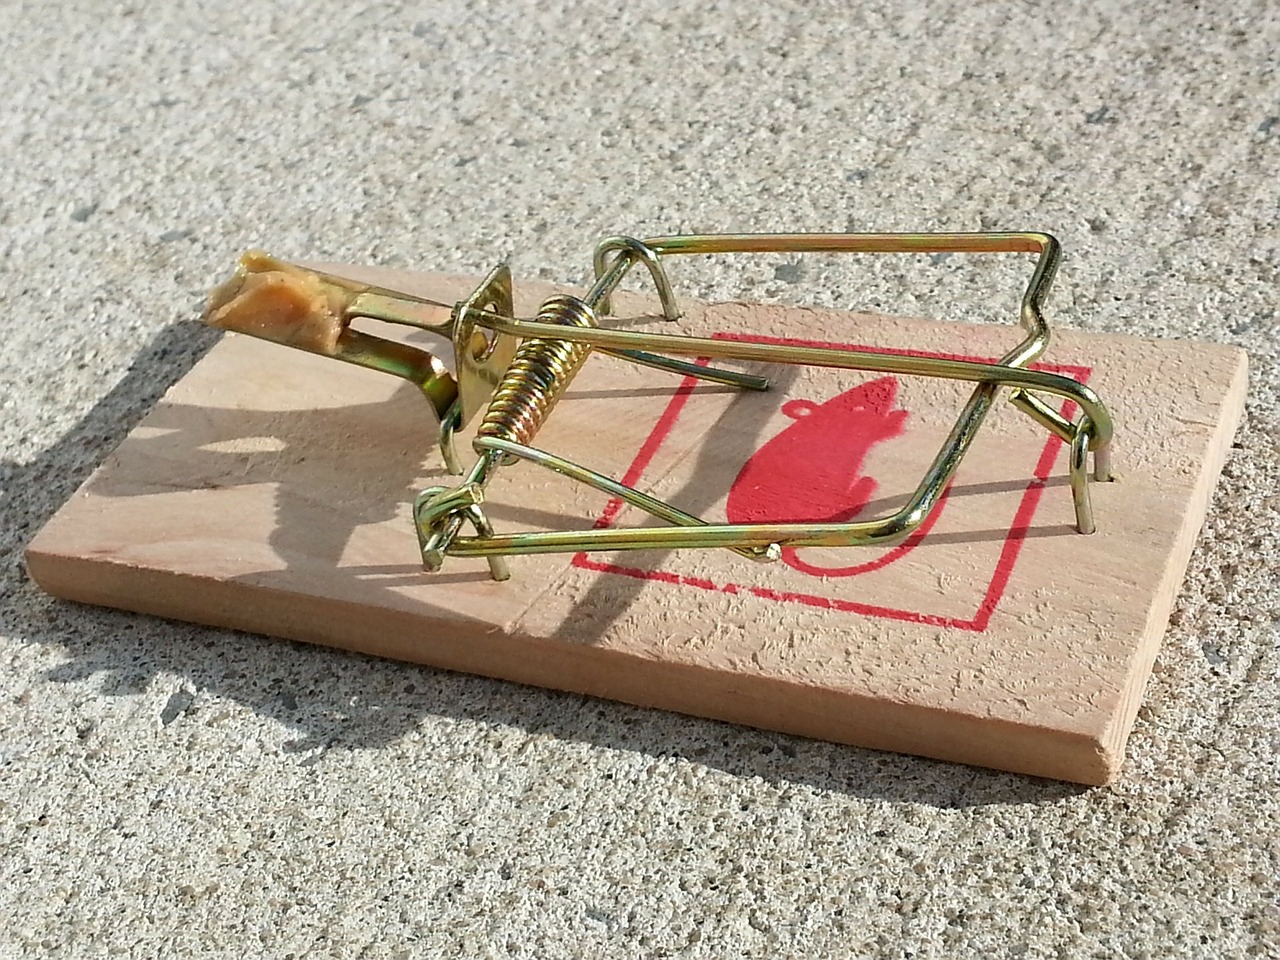 what is the most effective mouse trap